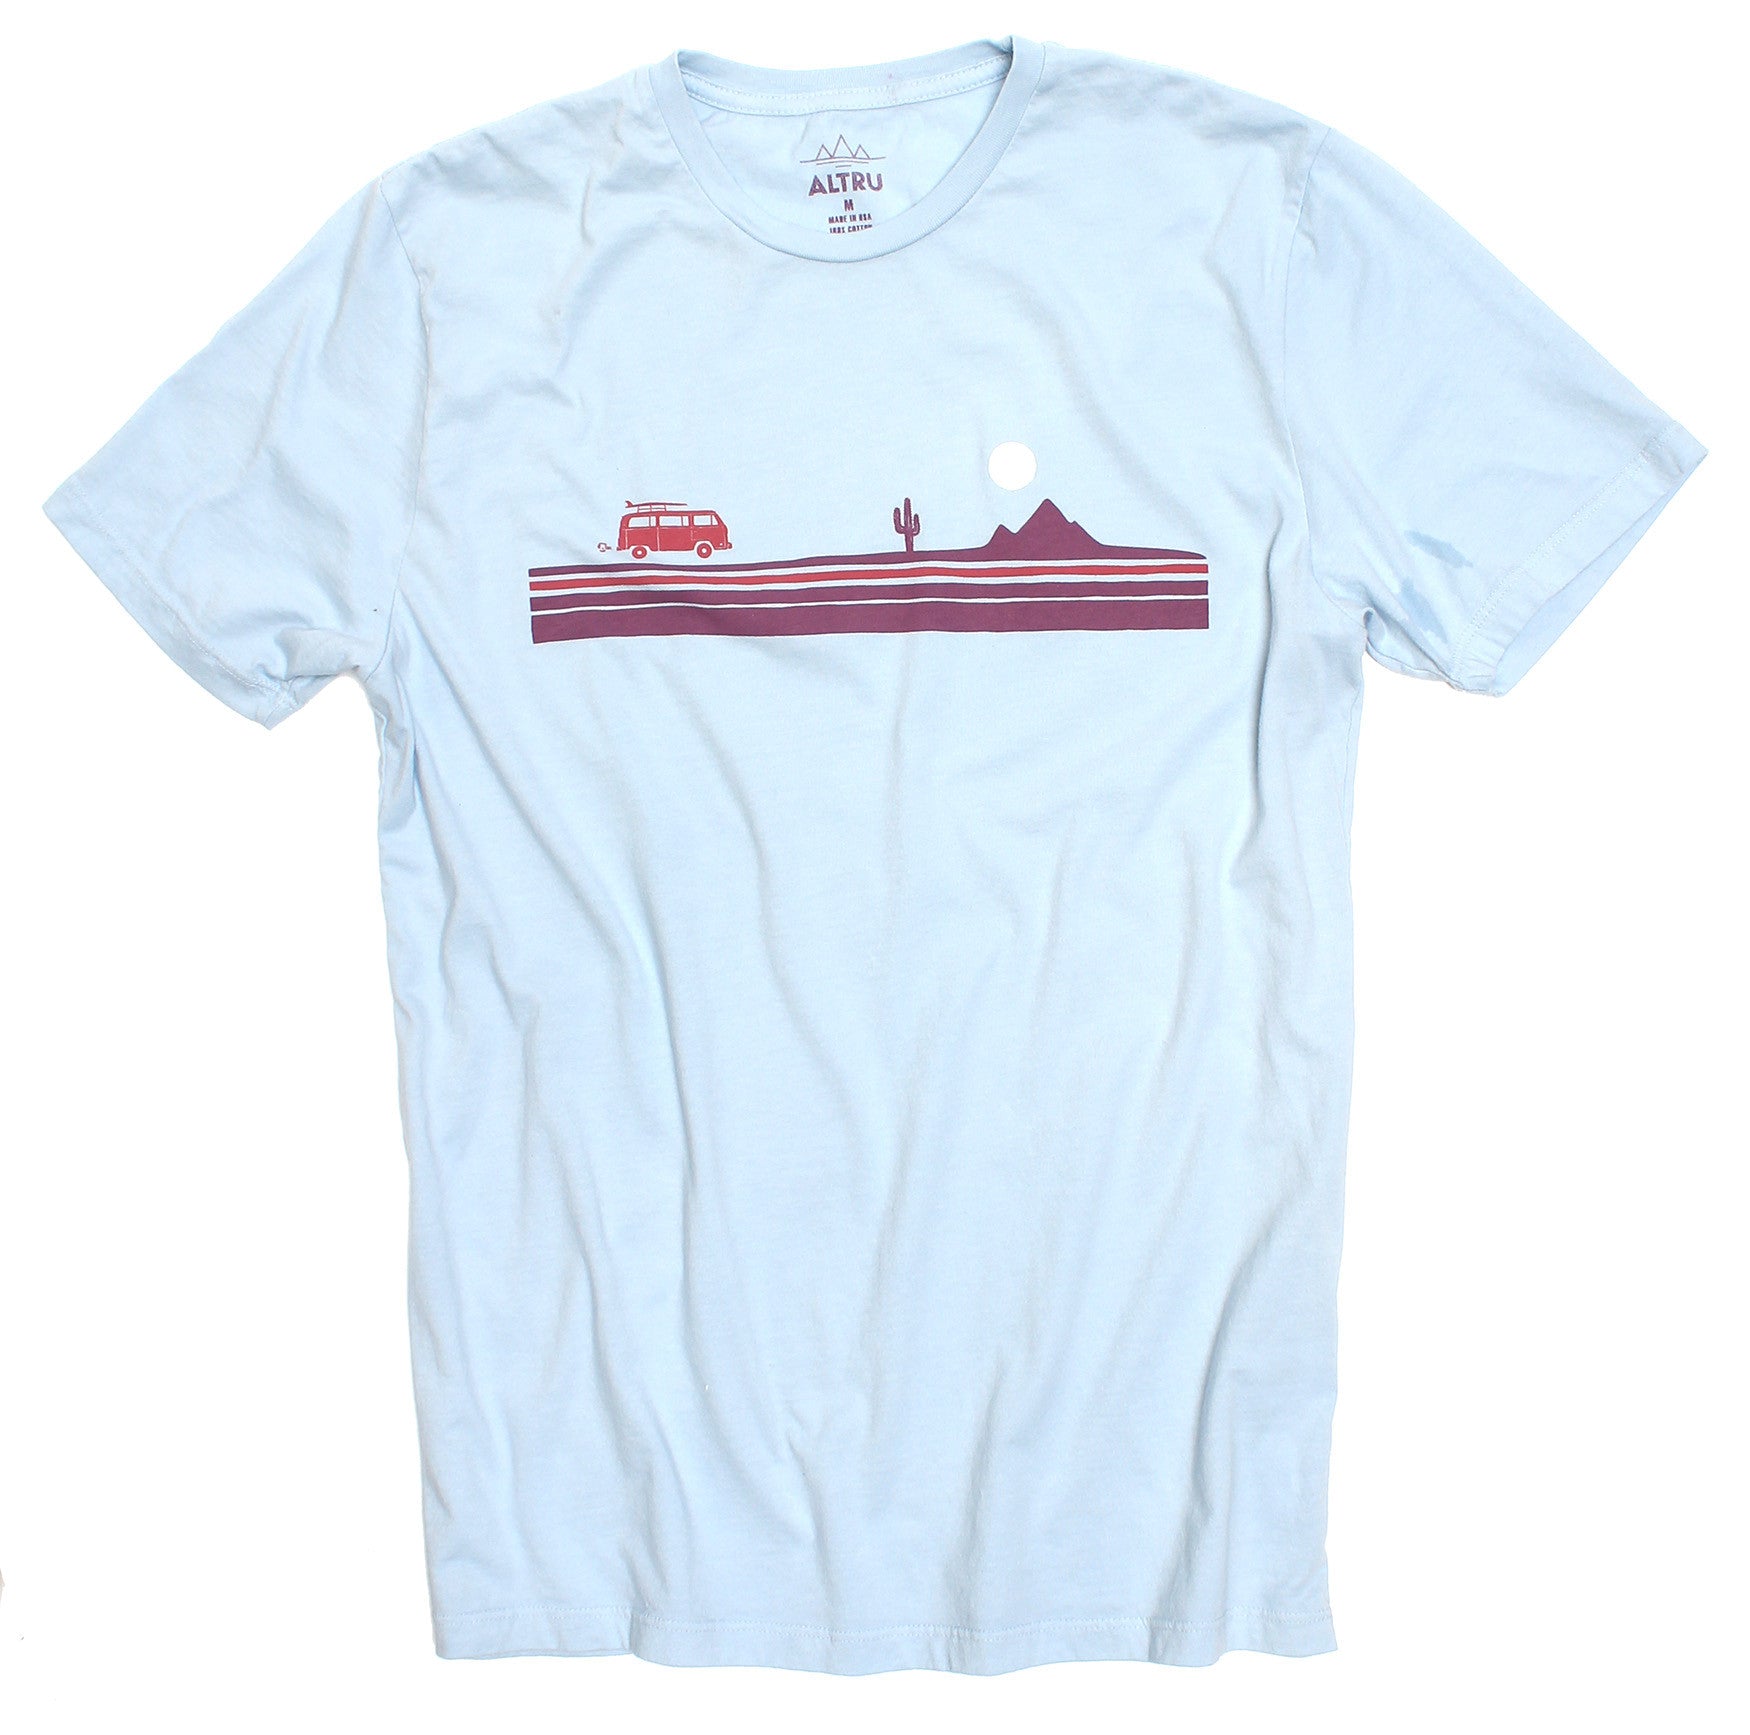 Desert Road Trip Chest Stripe graphic Tees in various colors